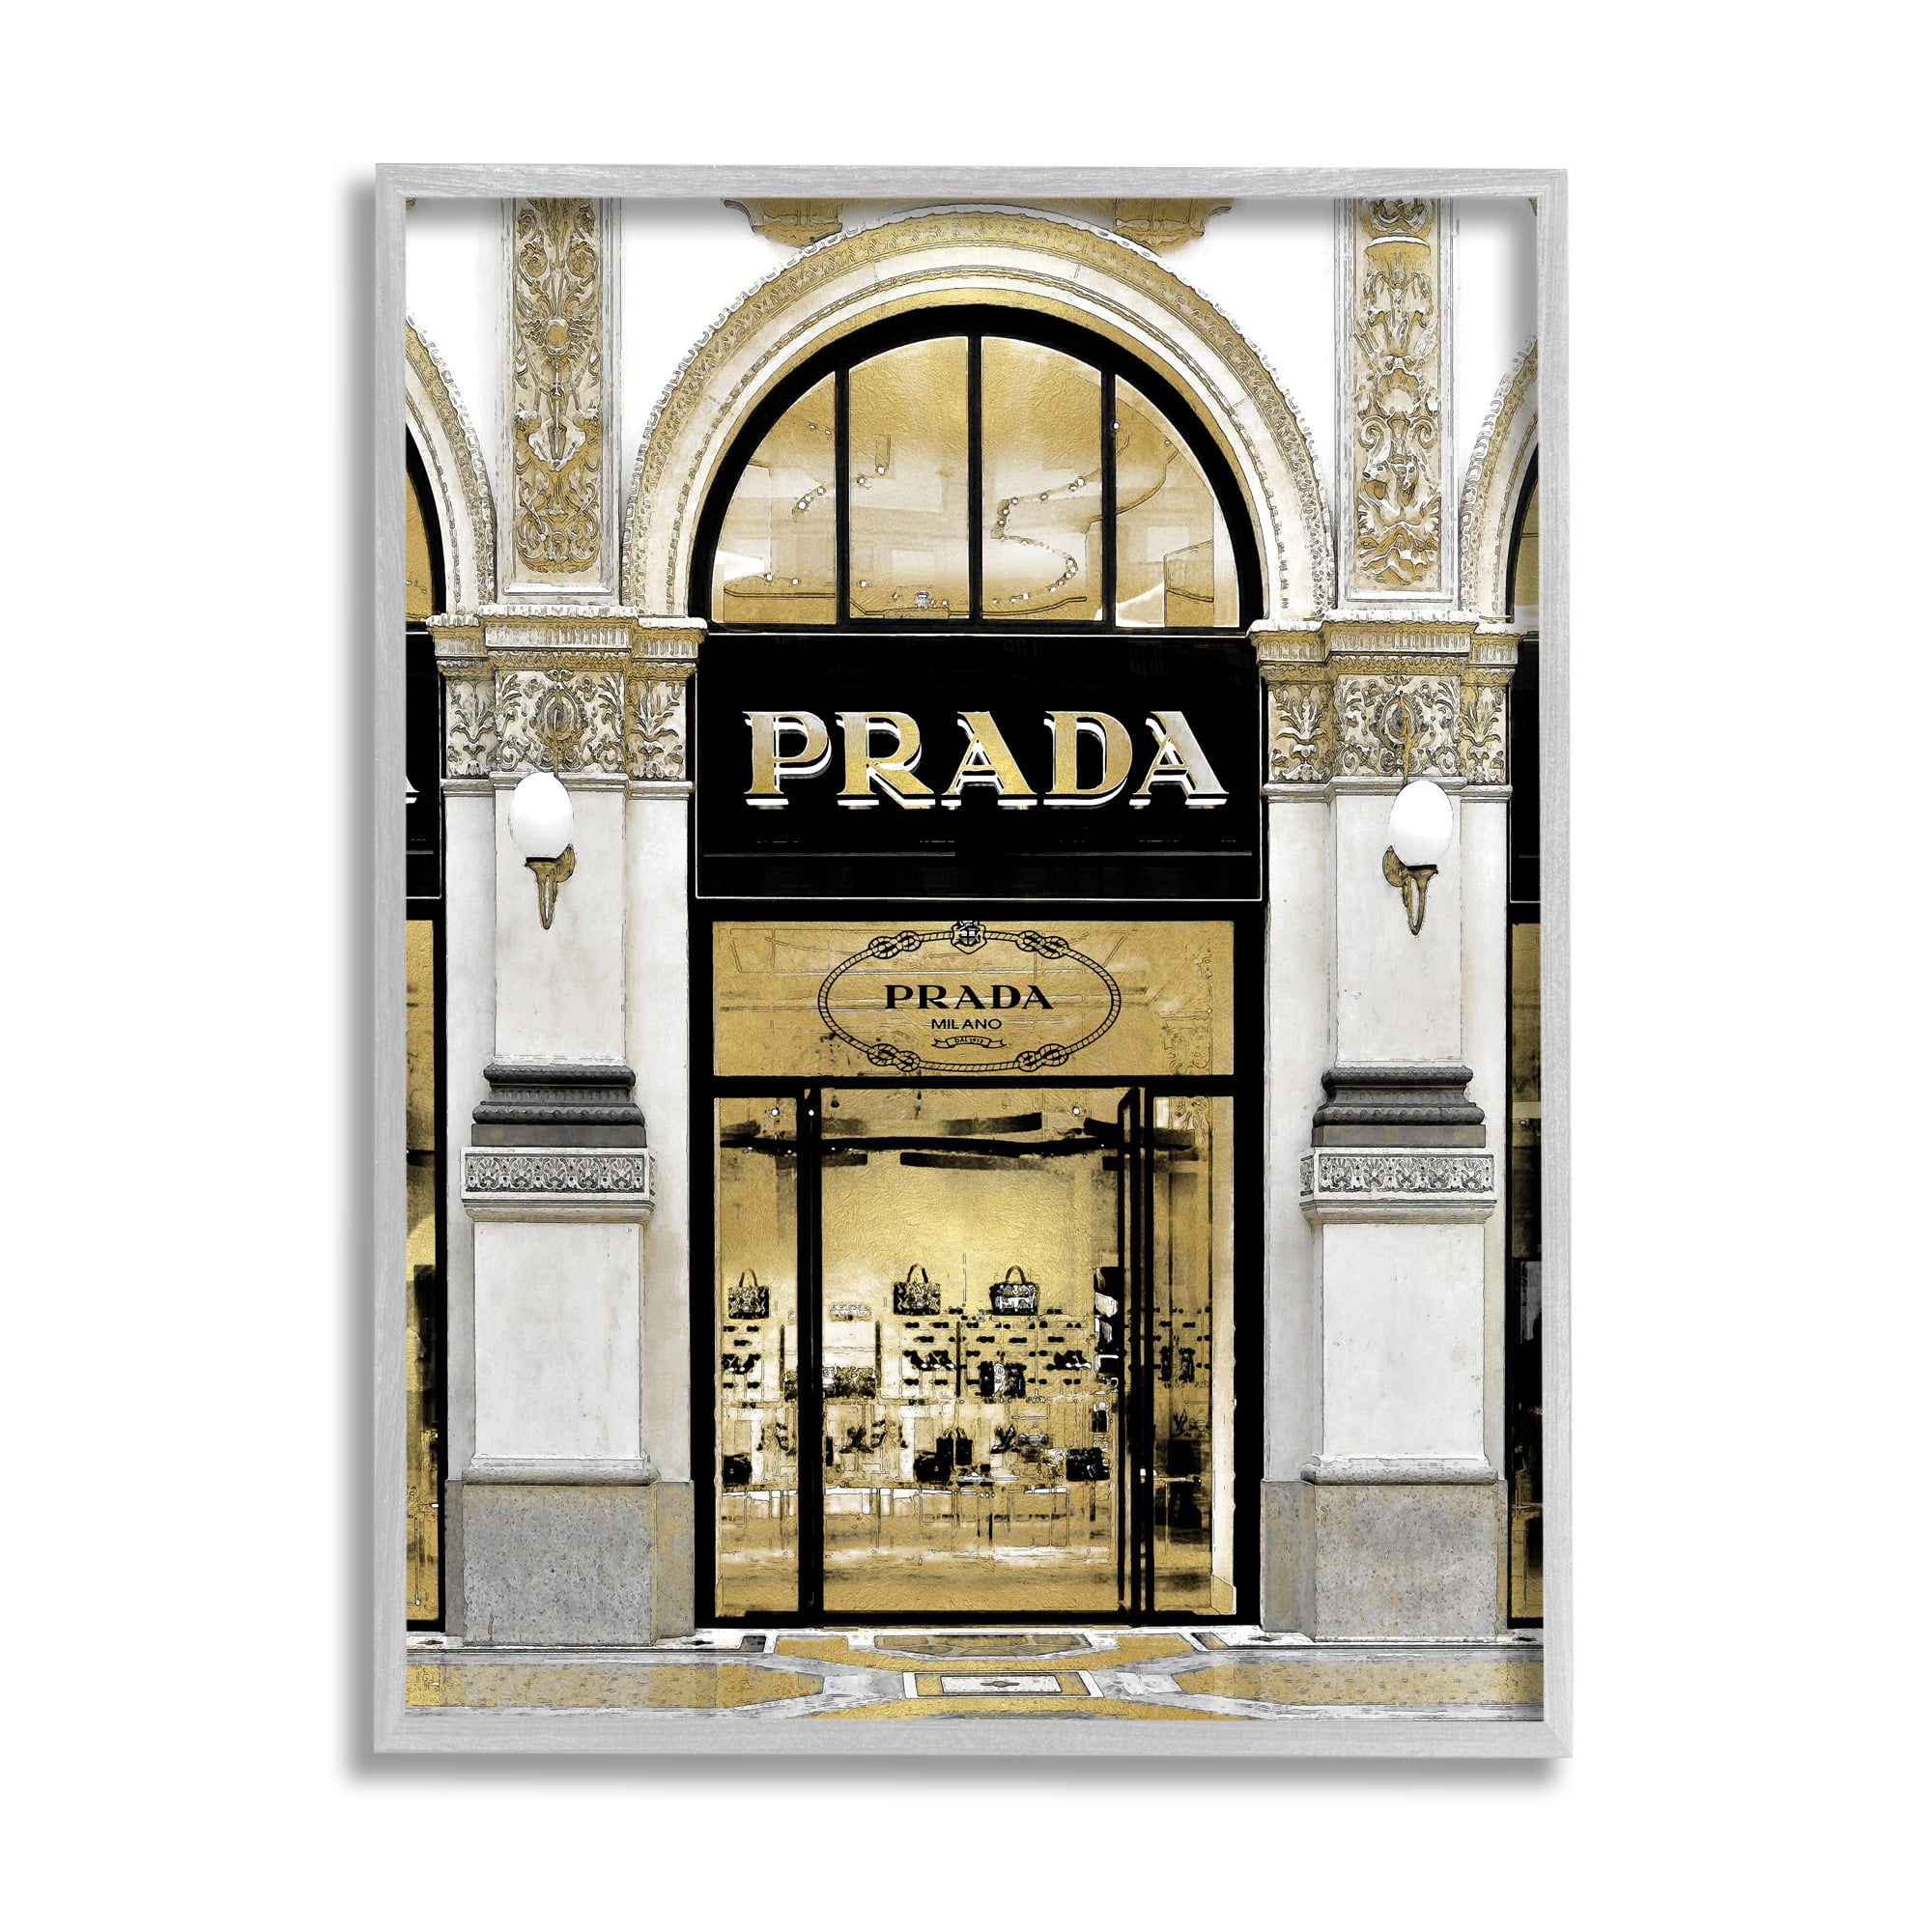 The Stupell Home Decor Collection Exquisite Storefront French Architecture  by Madeline Blake Floater Frame Architecture Wall Art Print 21 in. x 17 in.  ad-633_ffl_16x20 - The Home Depot